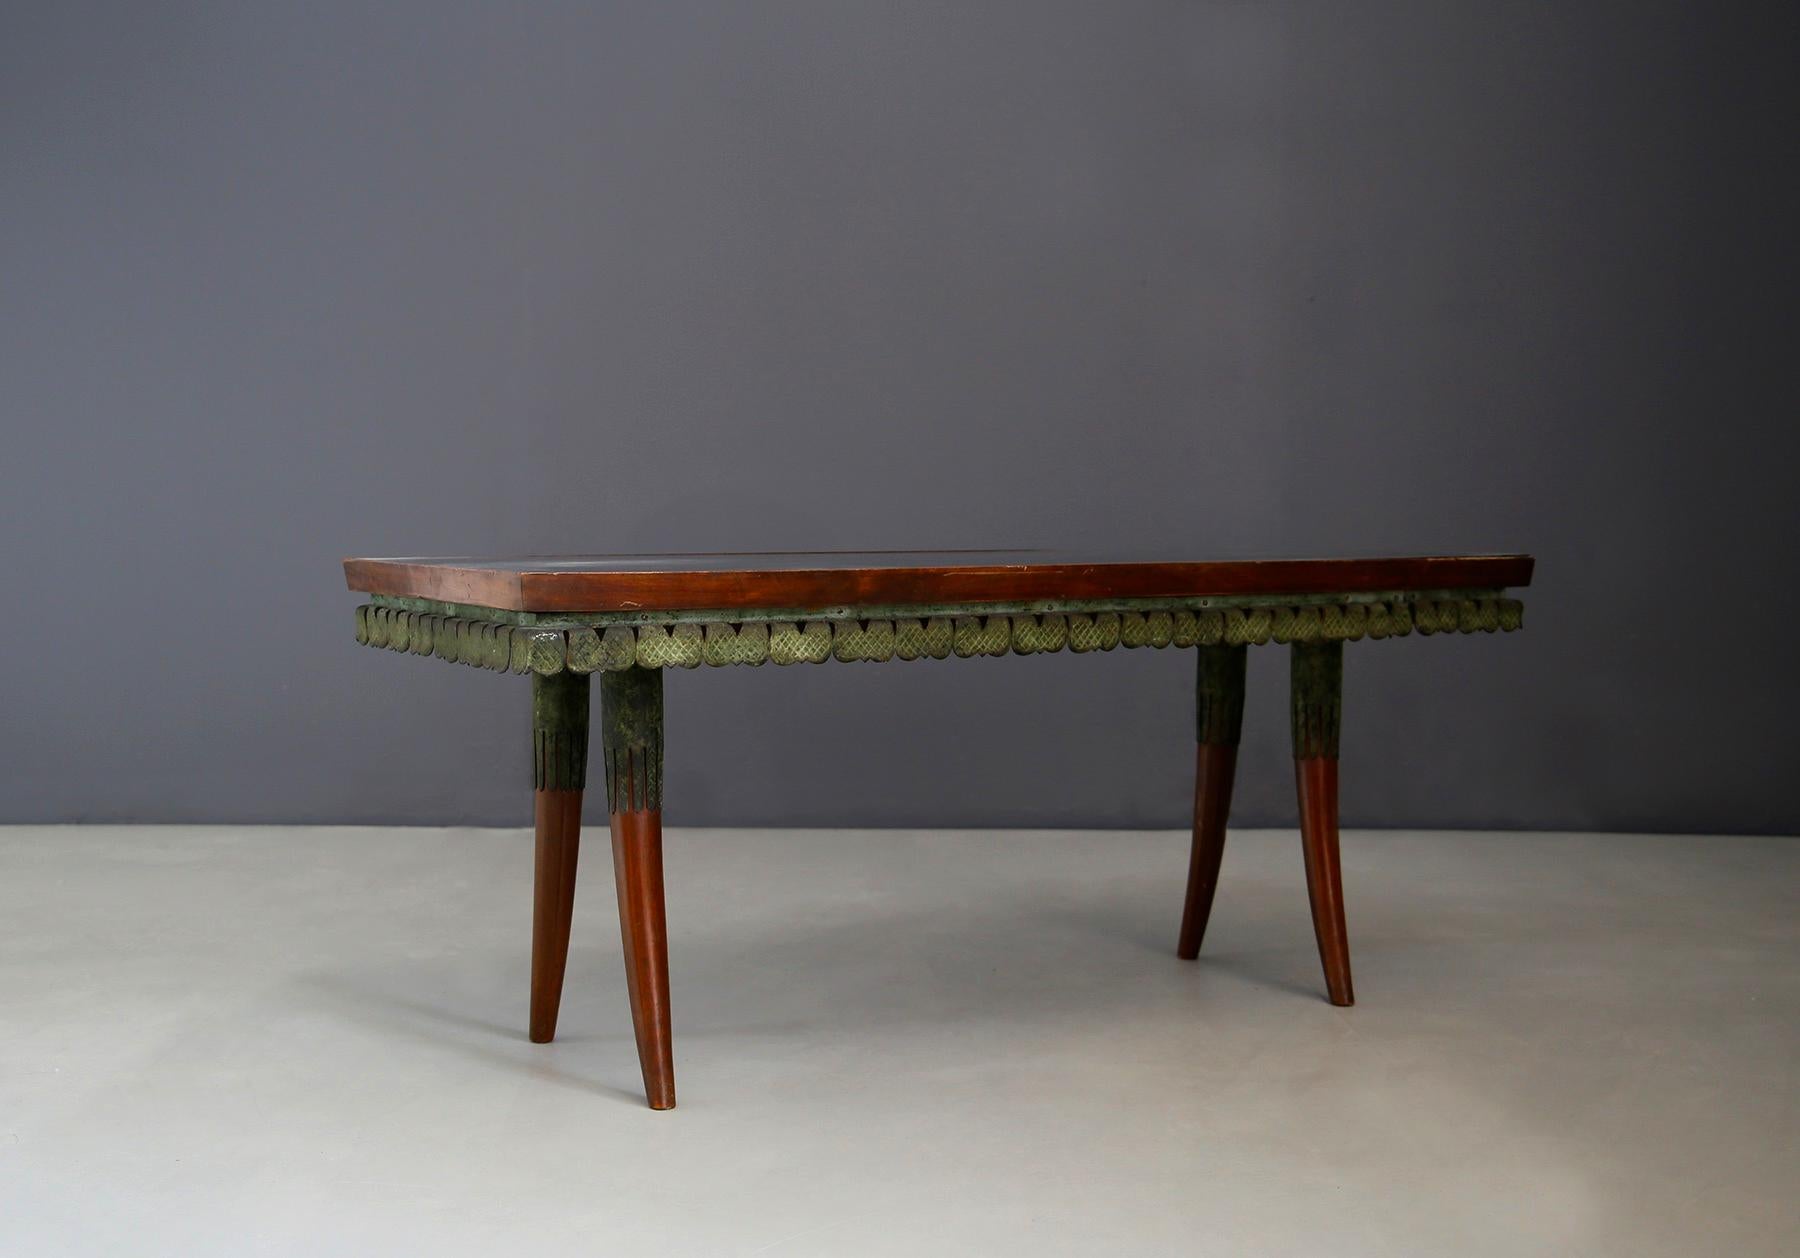 Very rare coffee table made by Pierluigi Colli around the 1940s. Of beautiful manufacture this table in Italian Art Deco style was made for an important private house in Genoa on commission (see photo). The table has 4 legs at the base in the shape